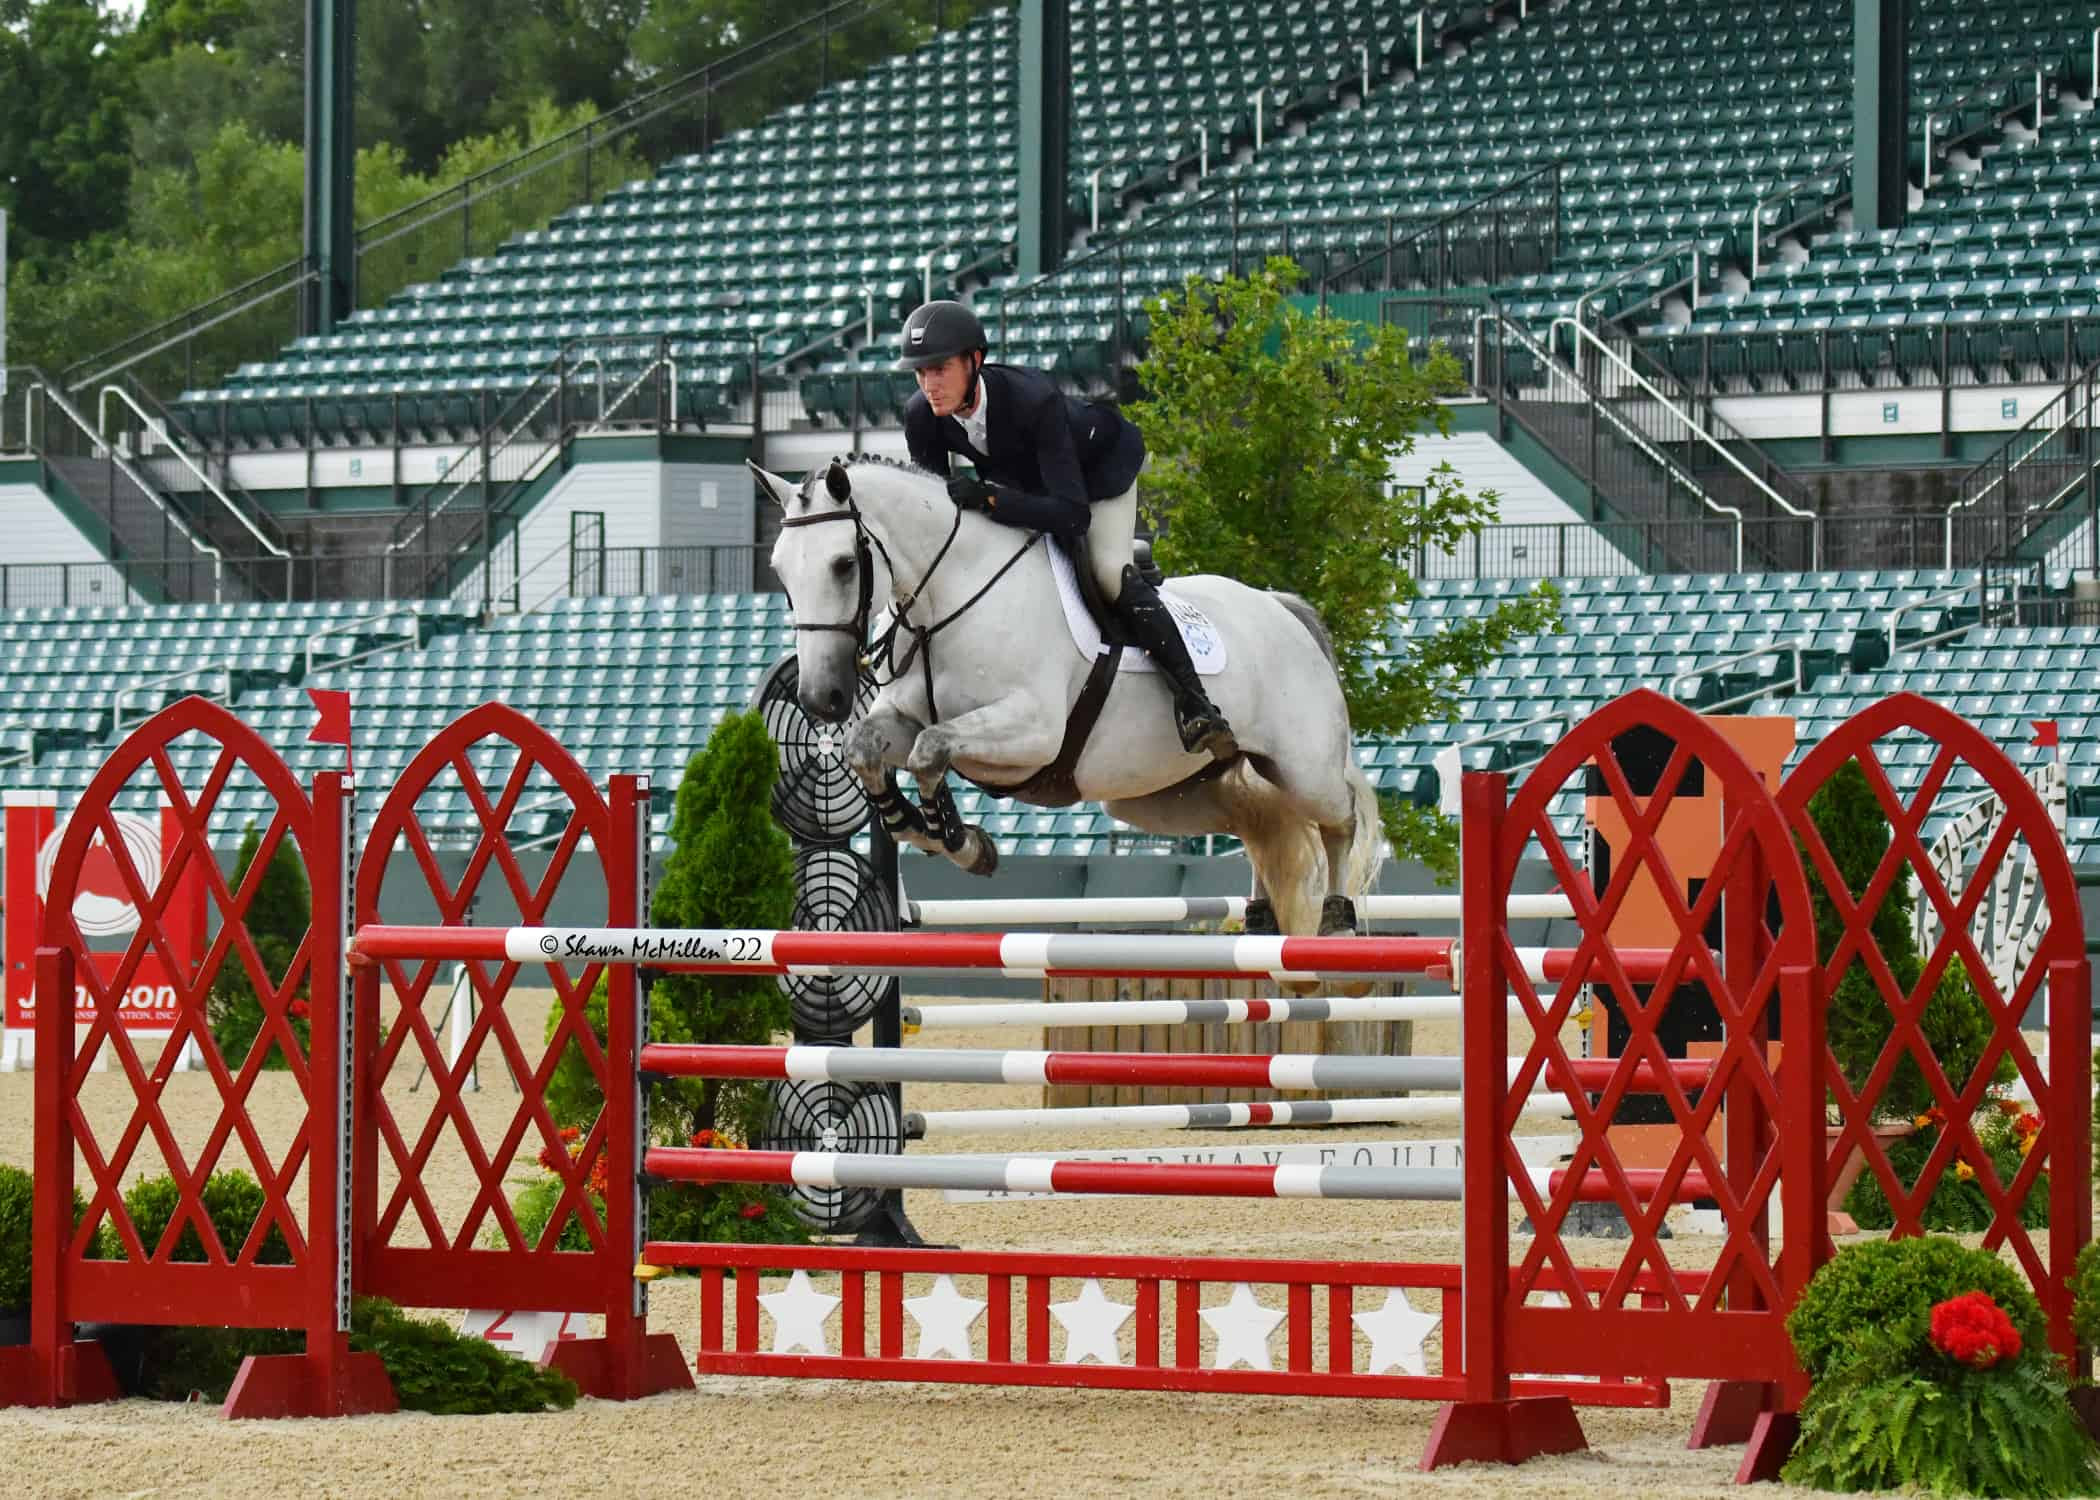 TJ O’Mara and Kassiodam Top the $5,000 Open Jumper 1.40m to Kick Off the Kentucky Horse Show Summer Series